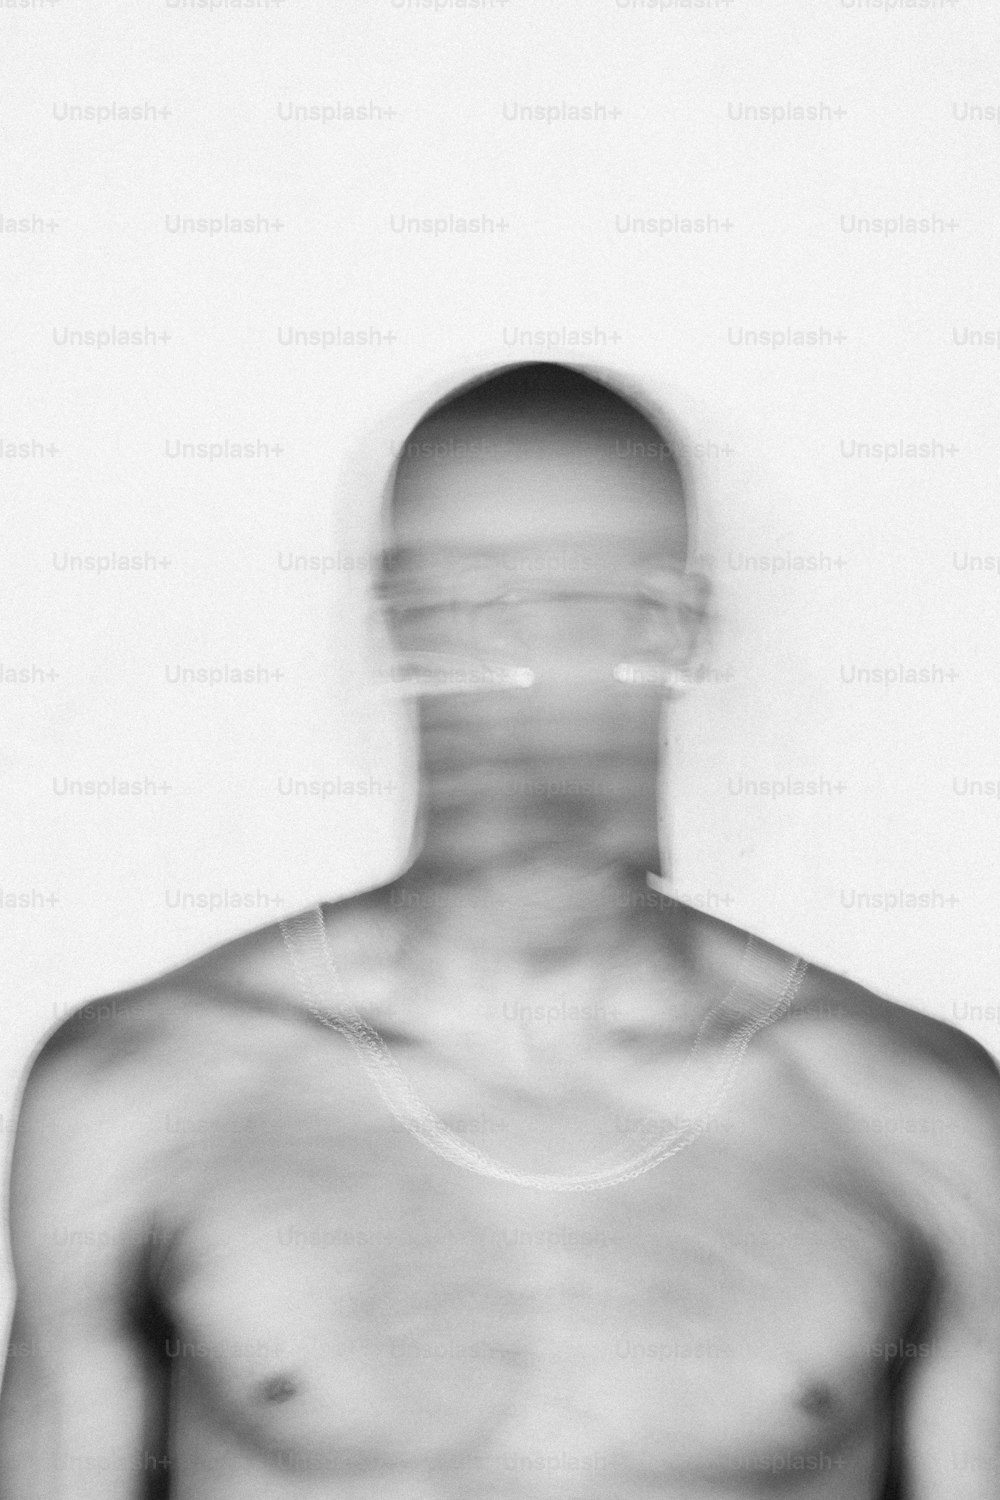 a blurry image of a shirtless man